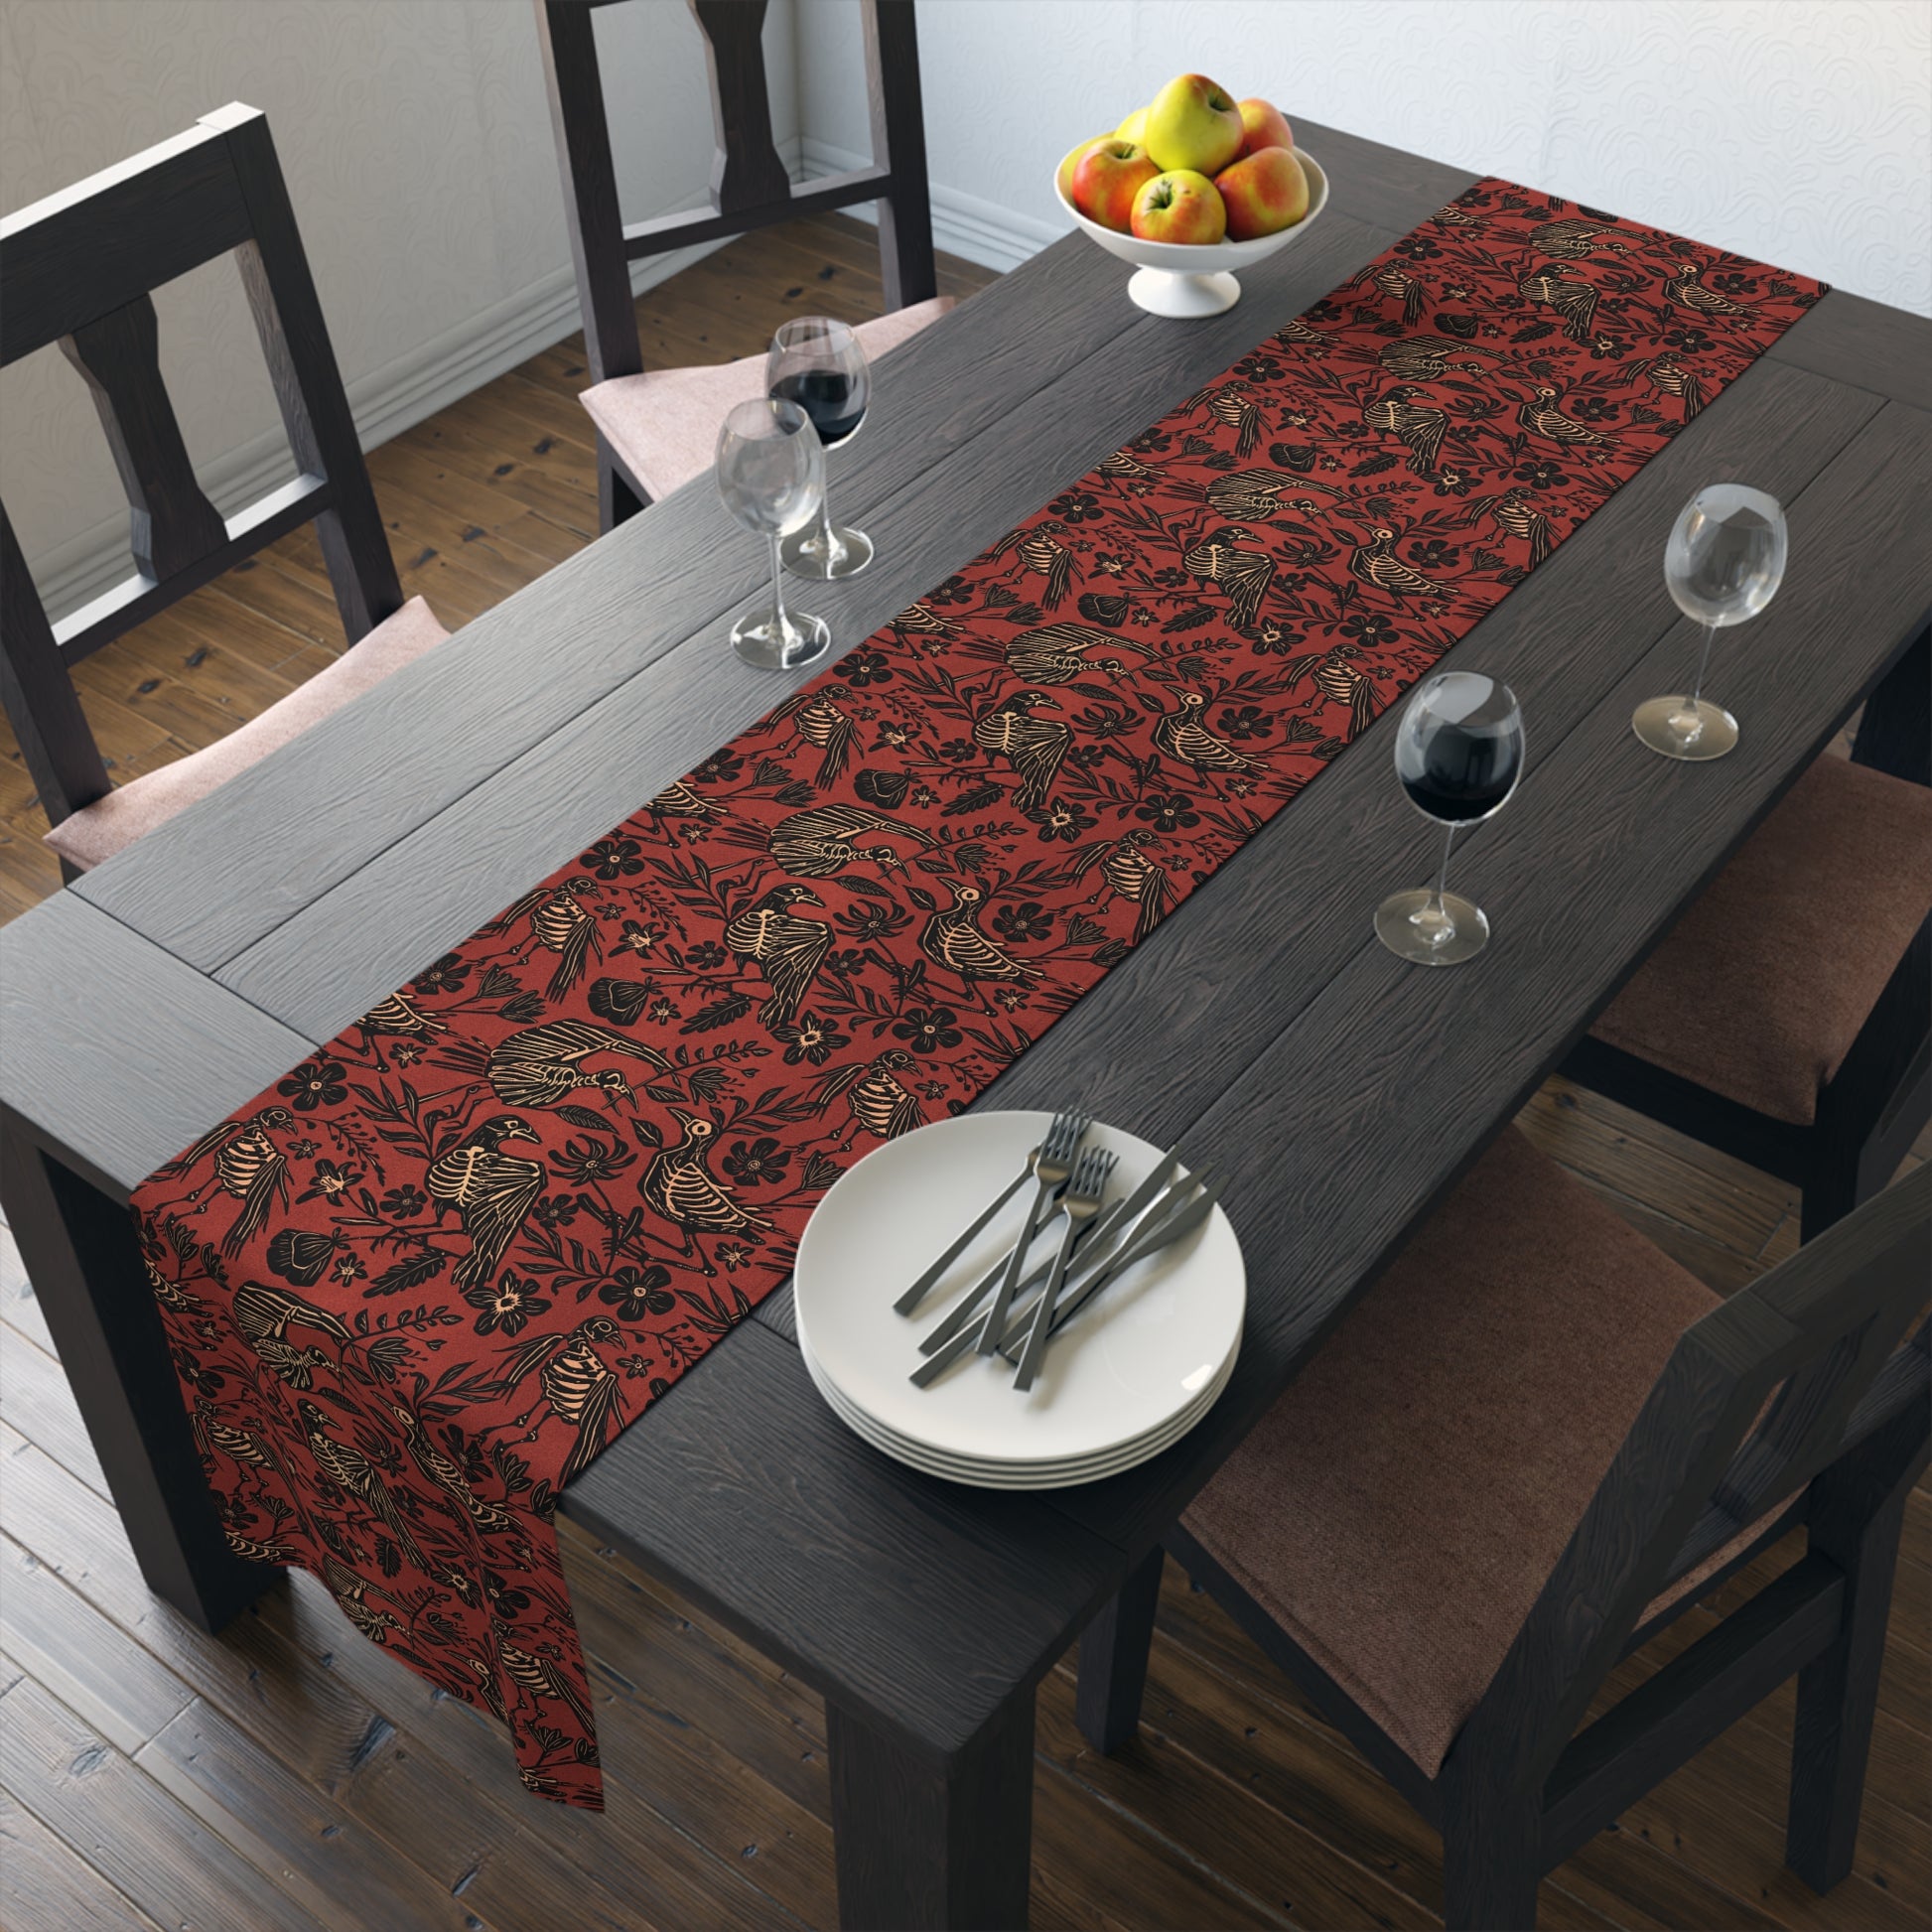 macabre autumn folk art floral bird skeleton table runner in rust red orange on a black wooden table with glasses of red wine